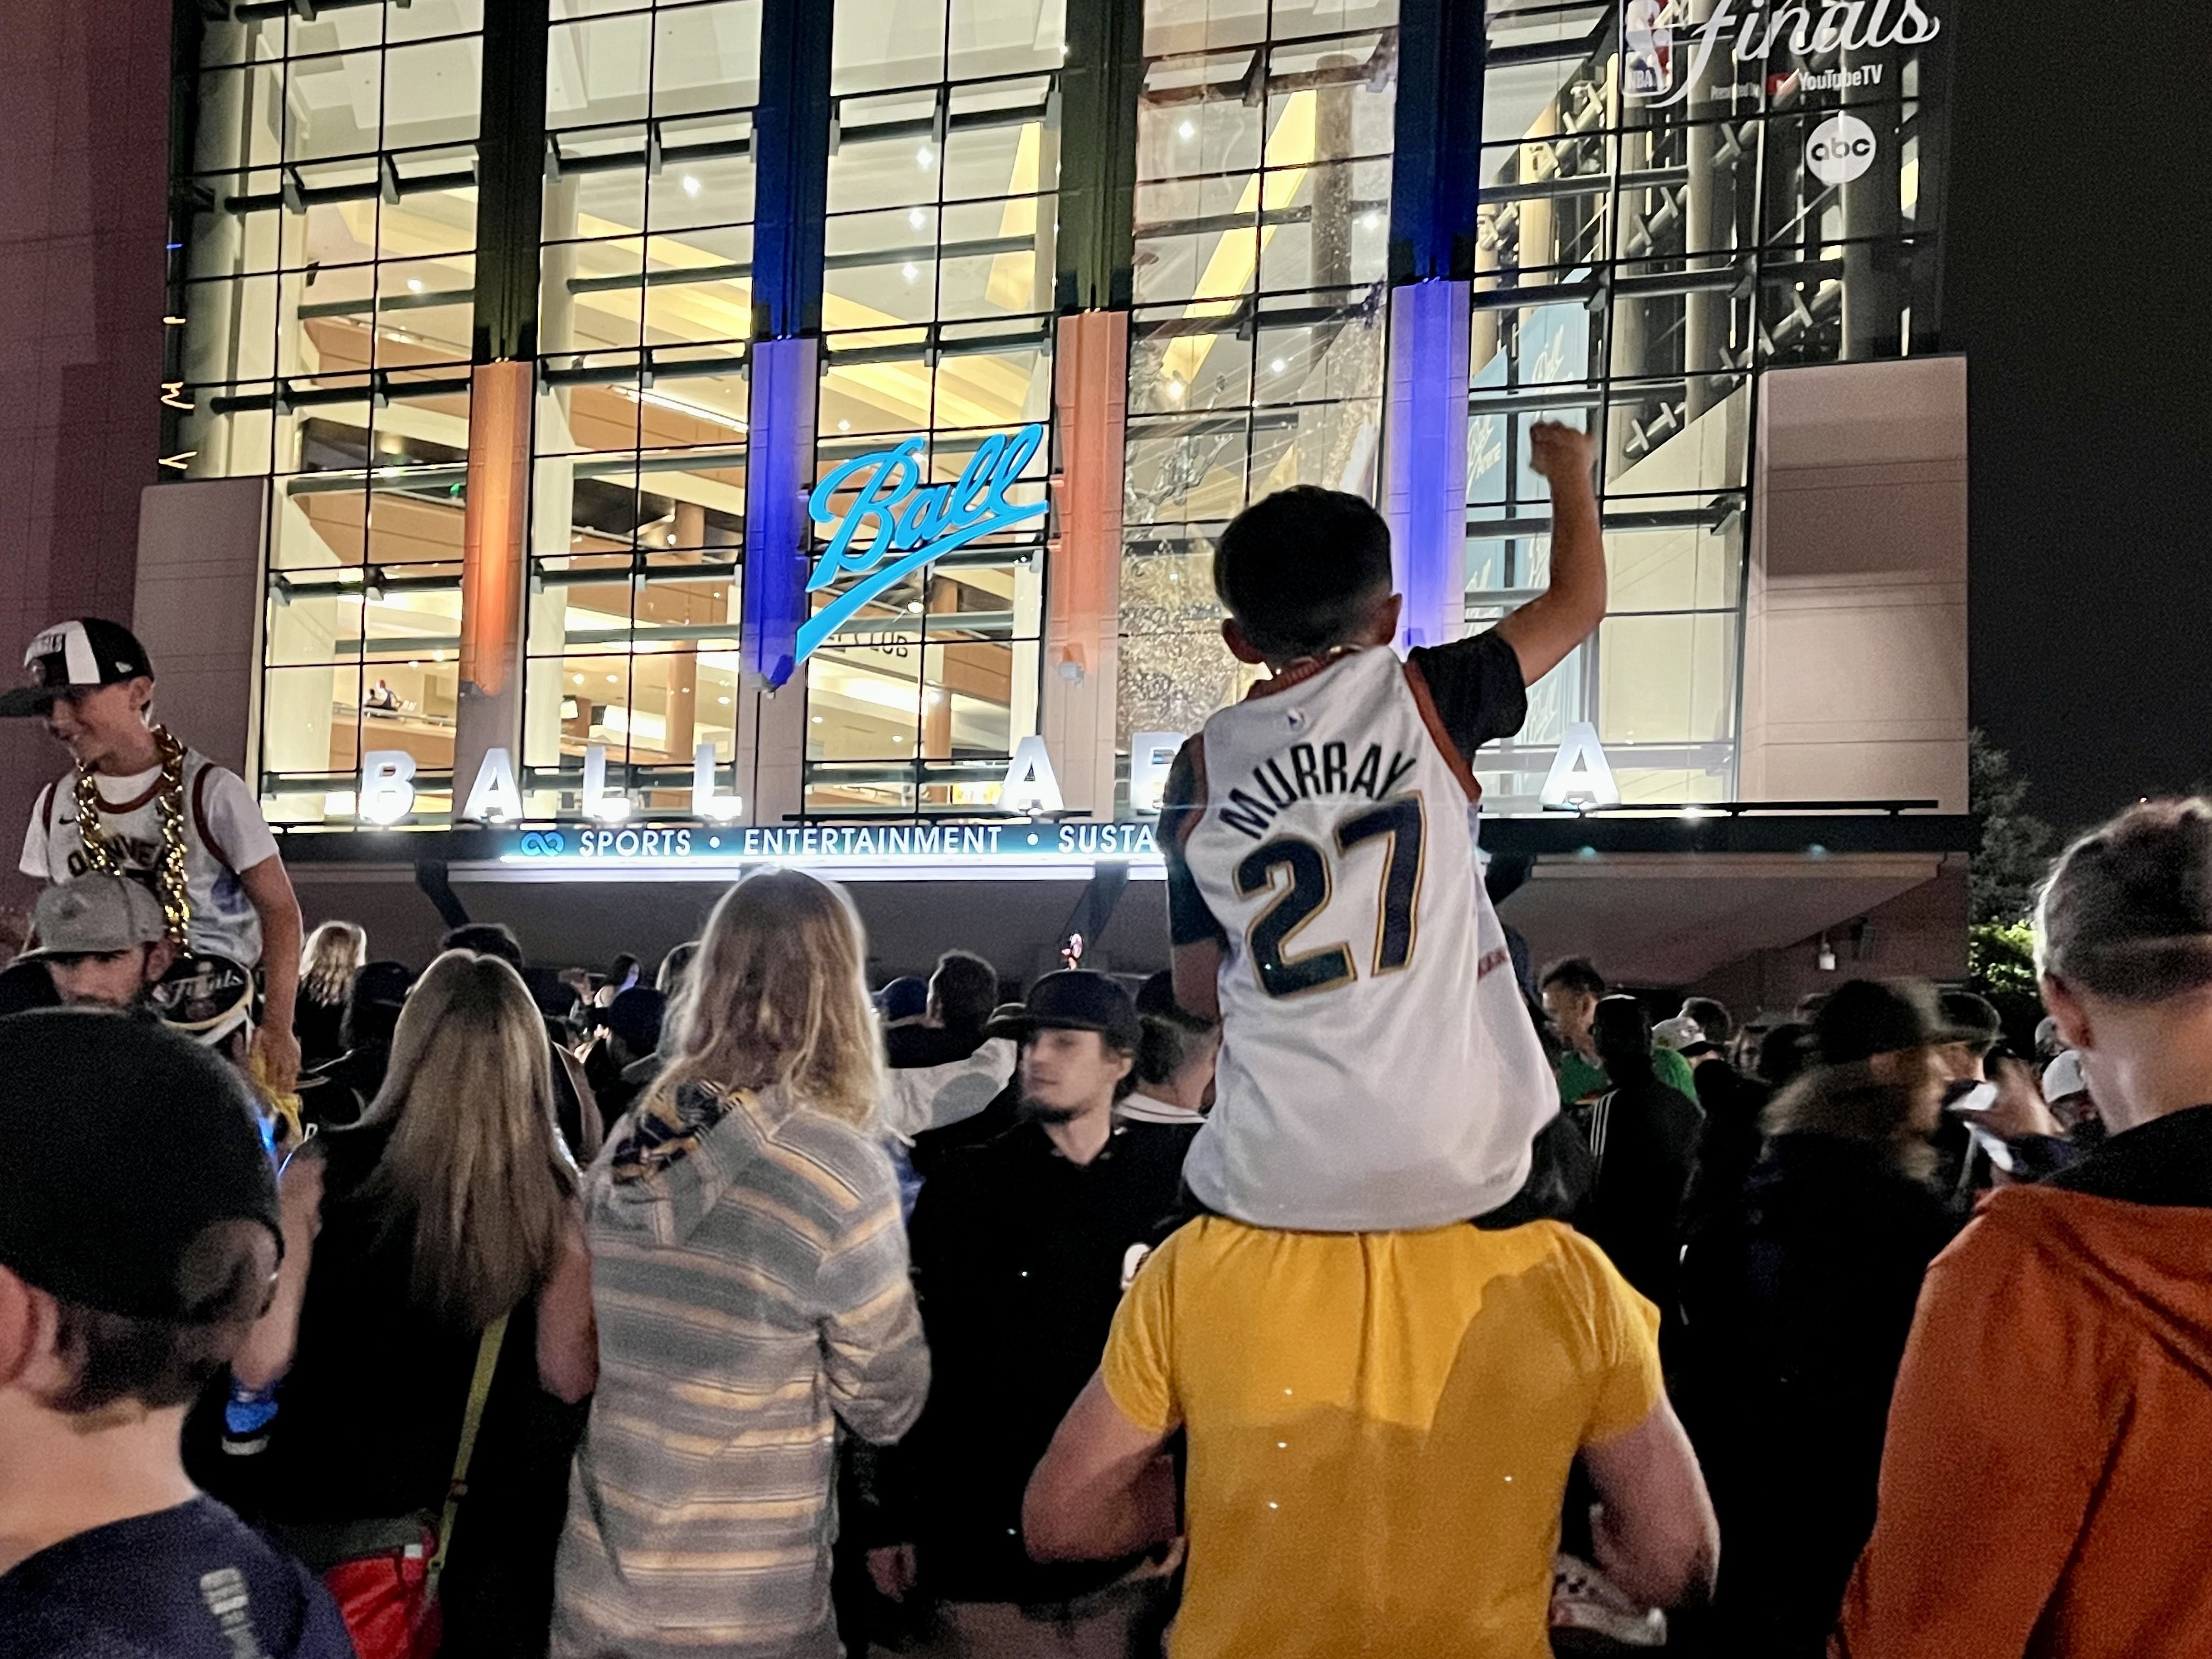 Nuggets fan rush to be among the first to own NBA Championship